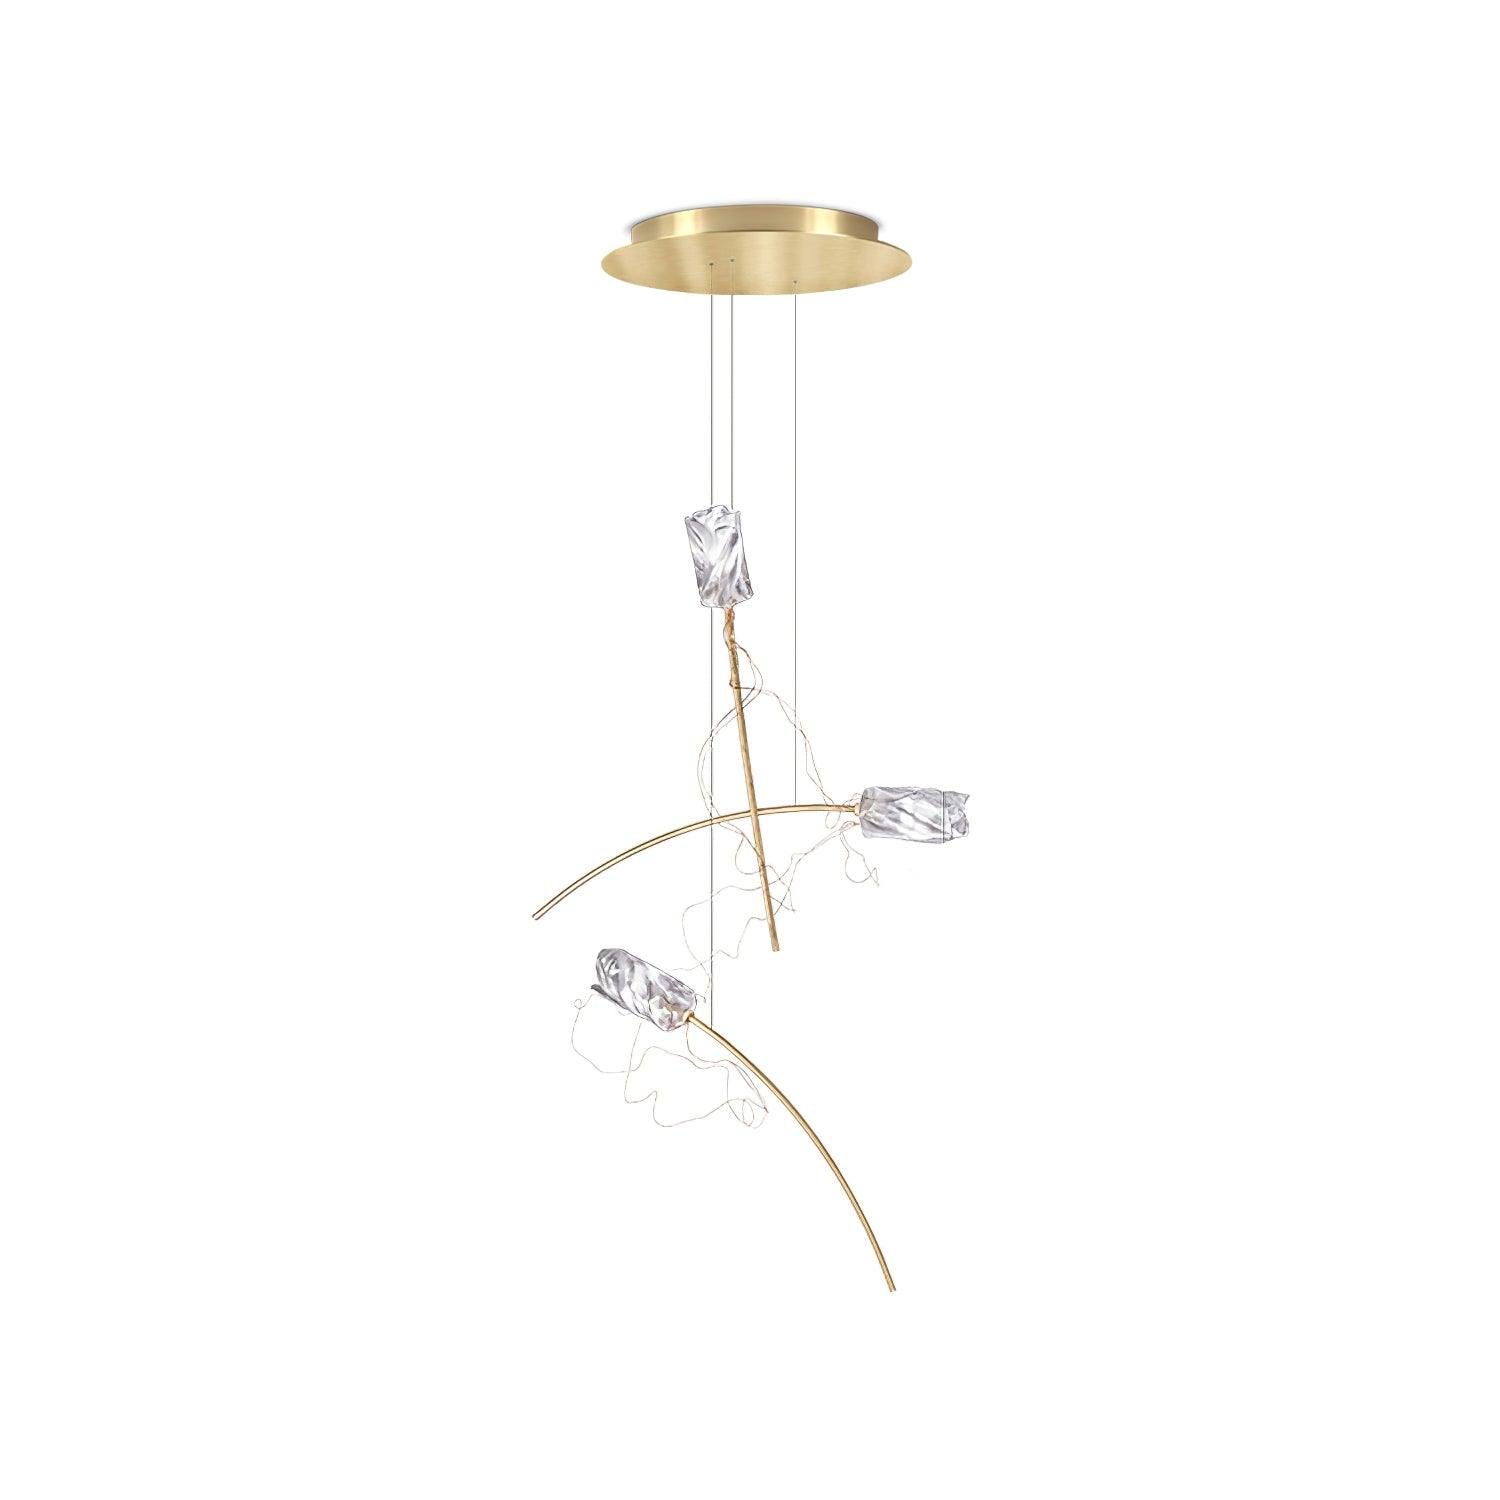 "Modern Tulip Pendant Light Fixture with 3 Hanging Heads, Gold and Clear Finish, Cool Light, 11.8" Diameter x 59" Height (30cm Diameter x 150cm Height)"